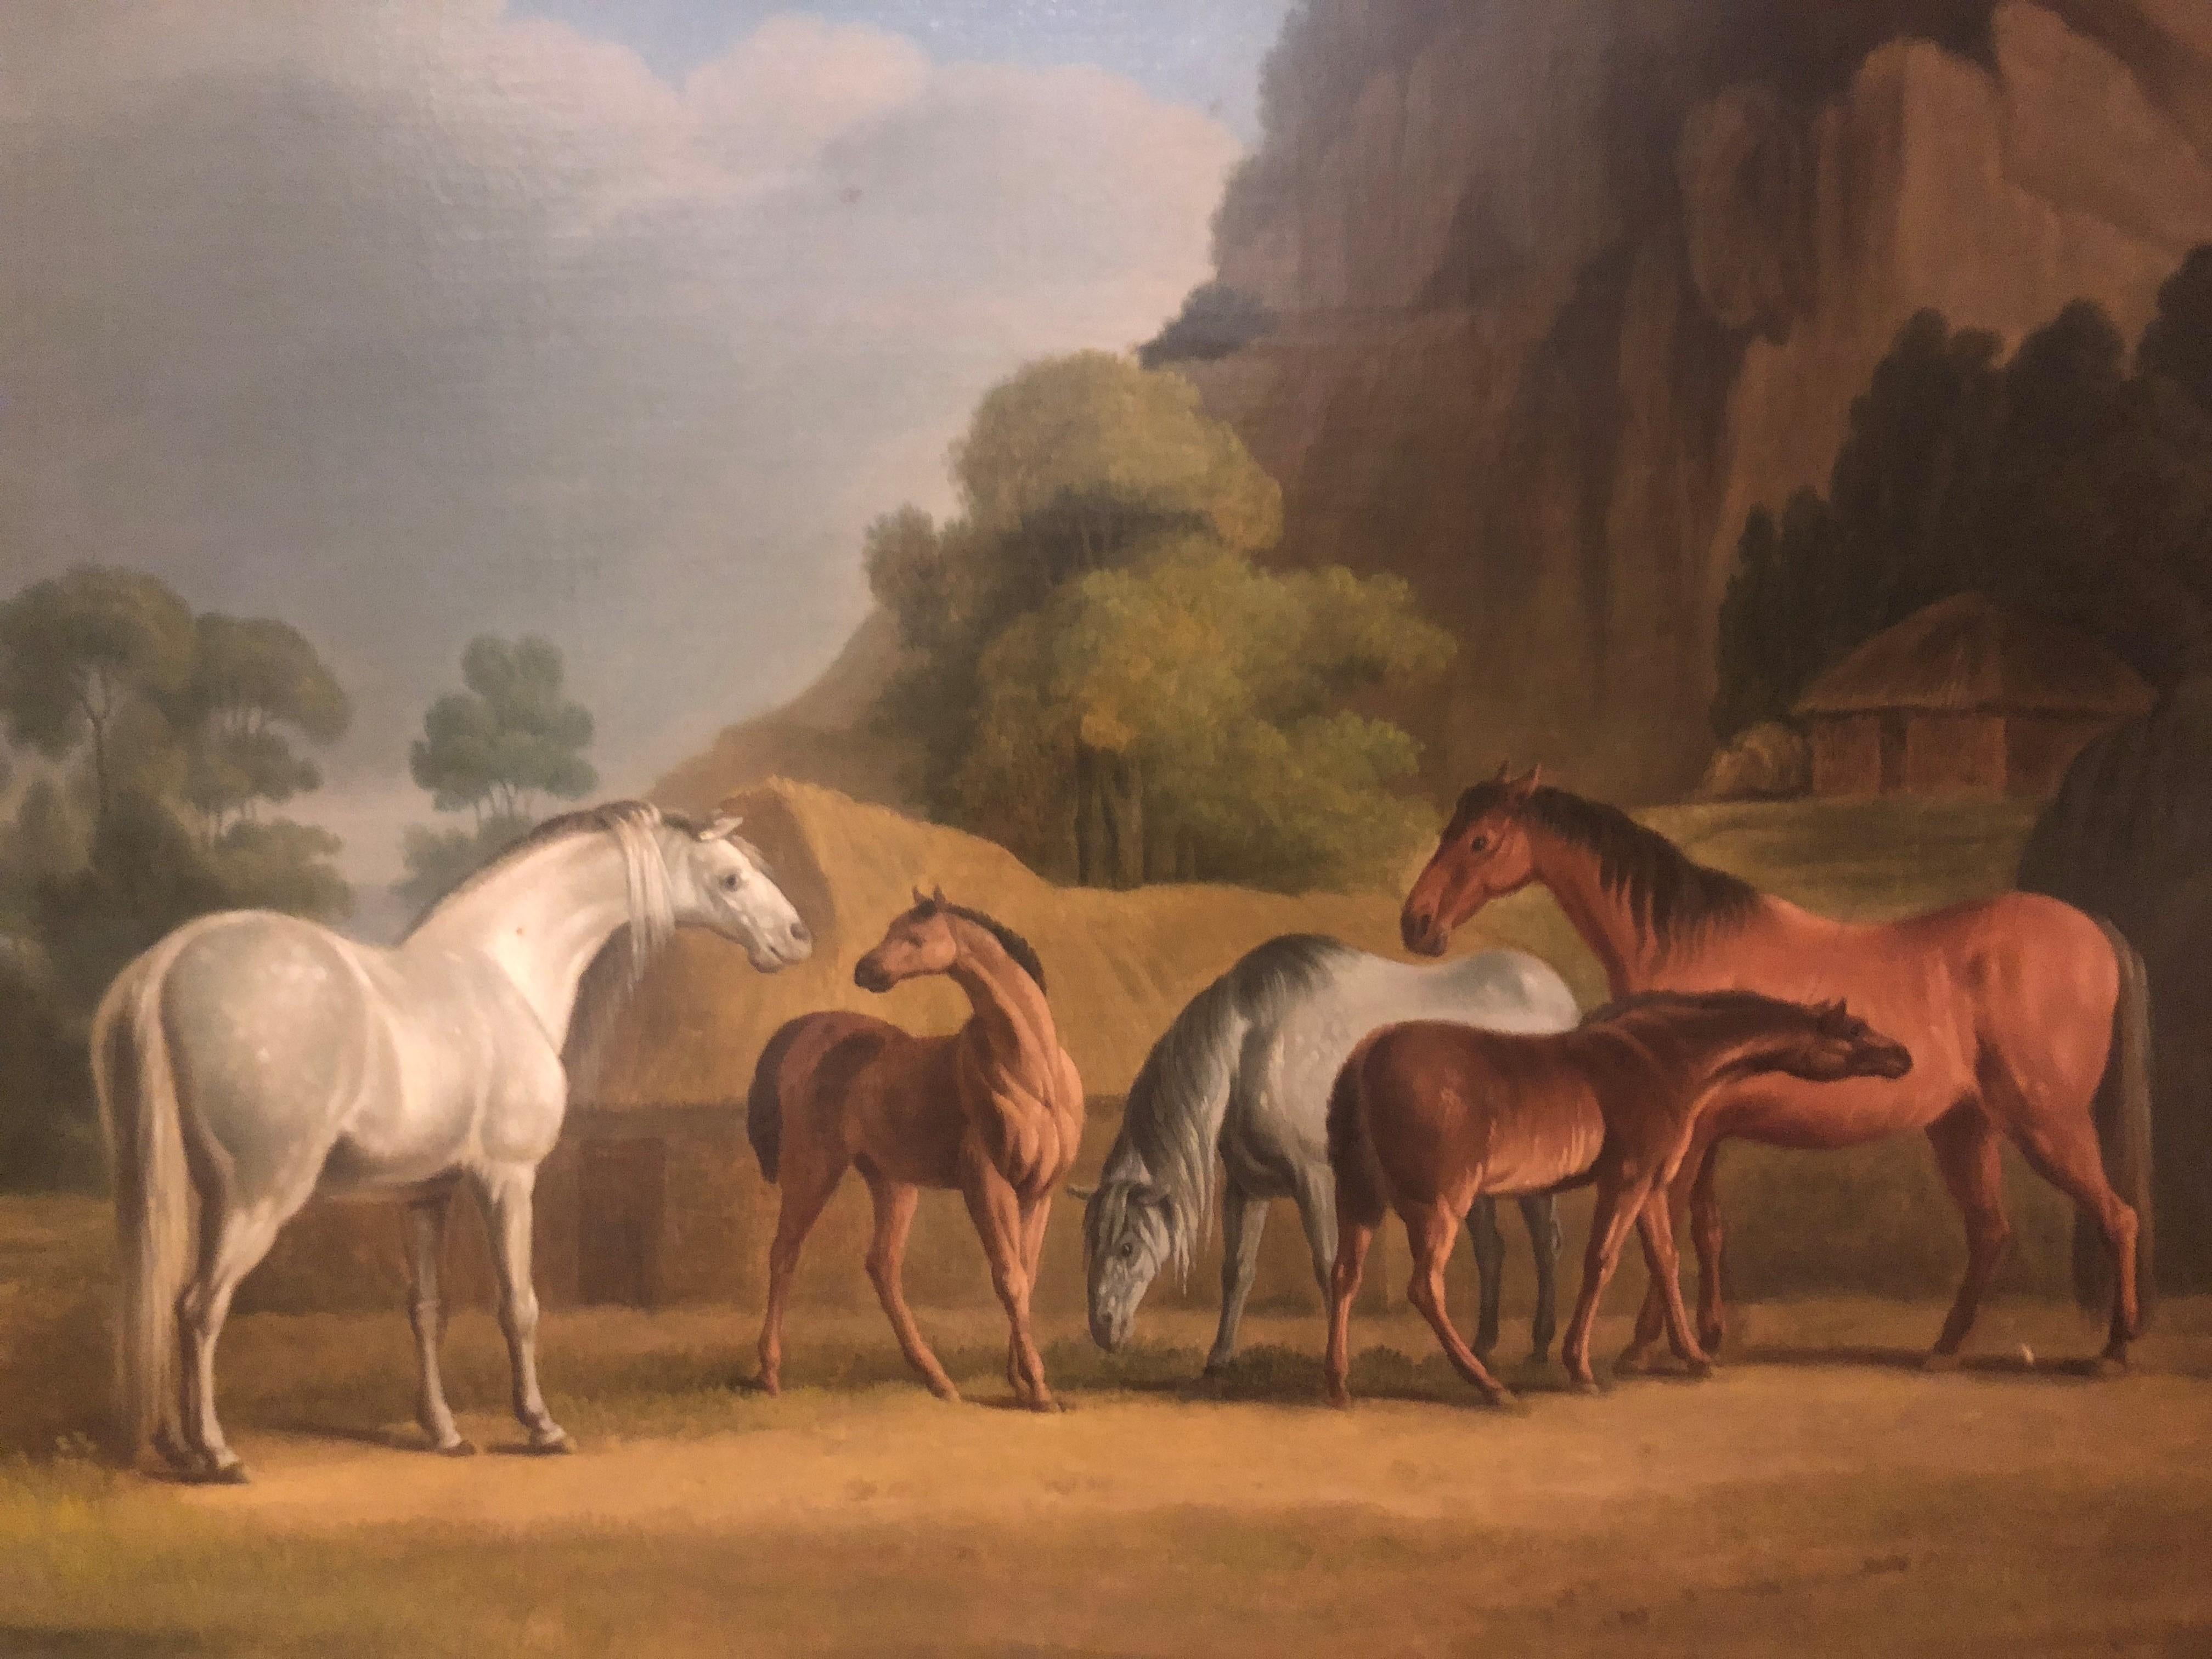 19th Century Oil painting of horses - Mares and Foals in a Landscape – Painting von Daniel Clowes